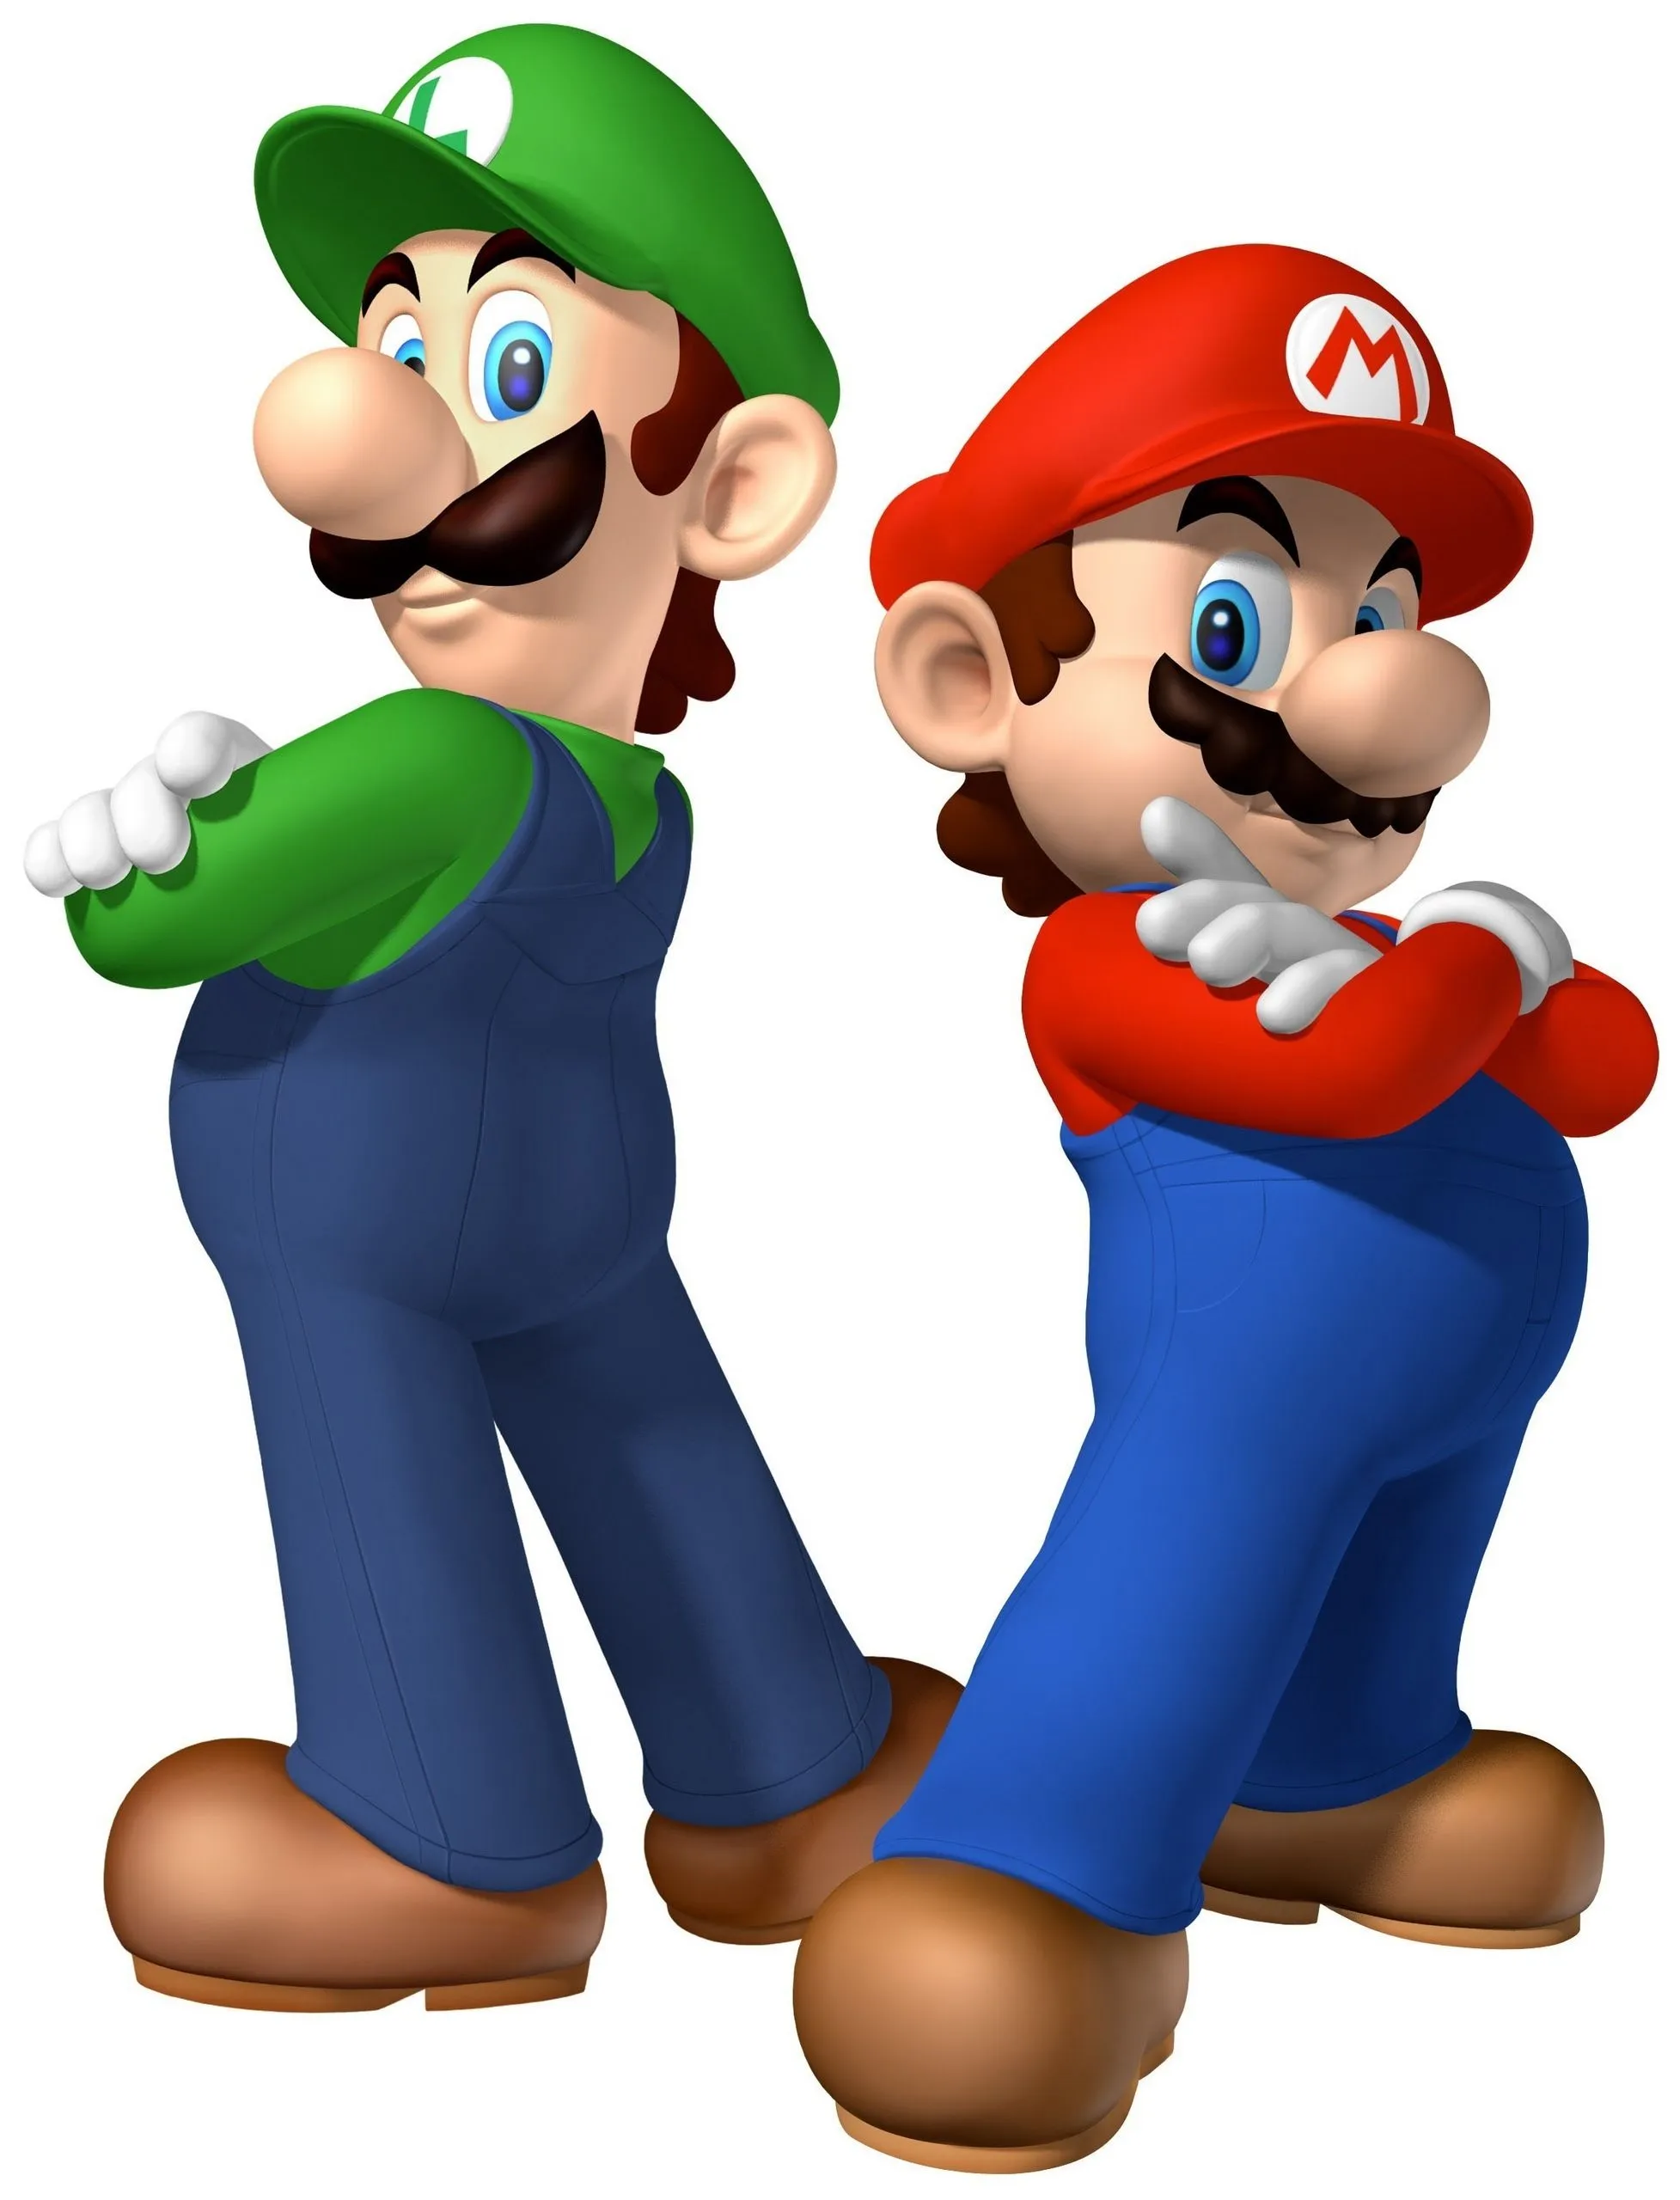 List of Mario games - The Nintendo Wiki - Wii, Nintendo DS, and ...